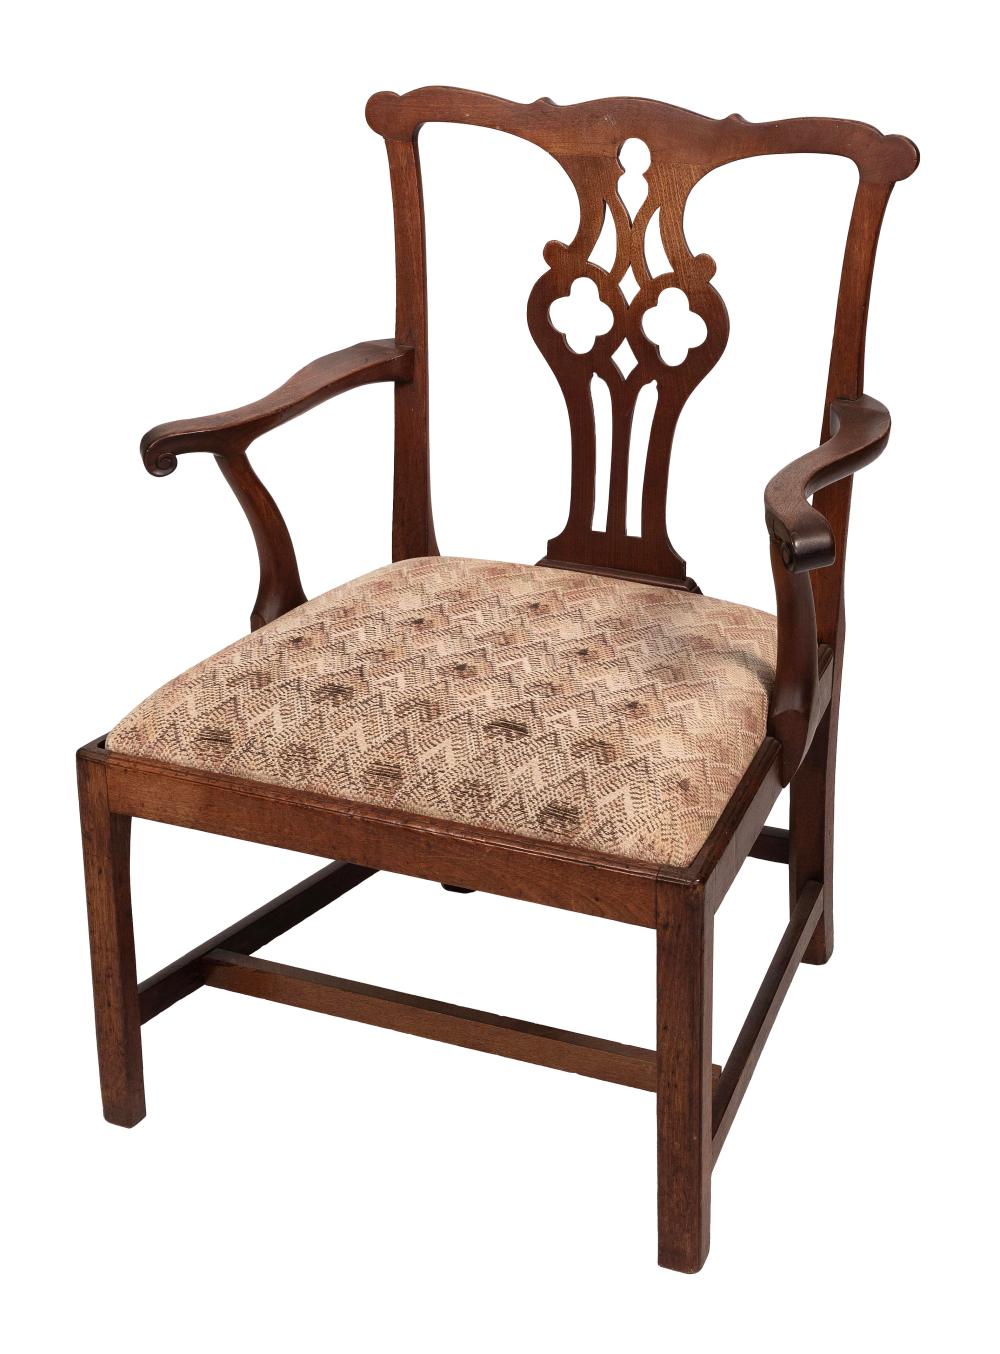 CHIPPENDALE ARMCHAIR LATE 18TH 2f1c0d